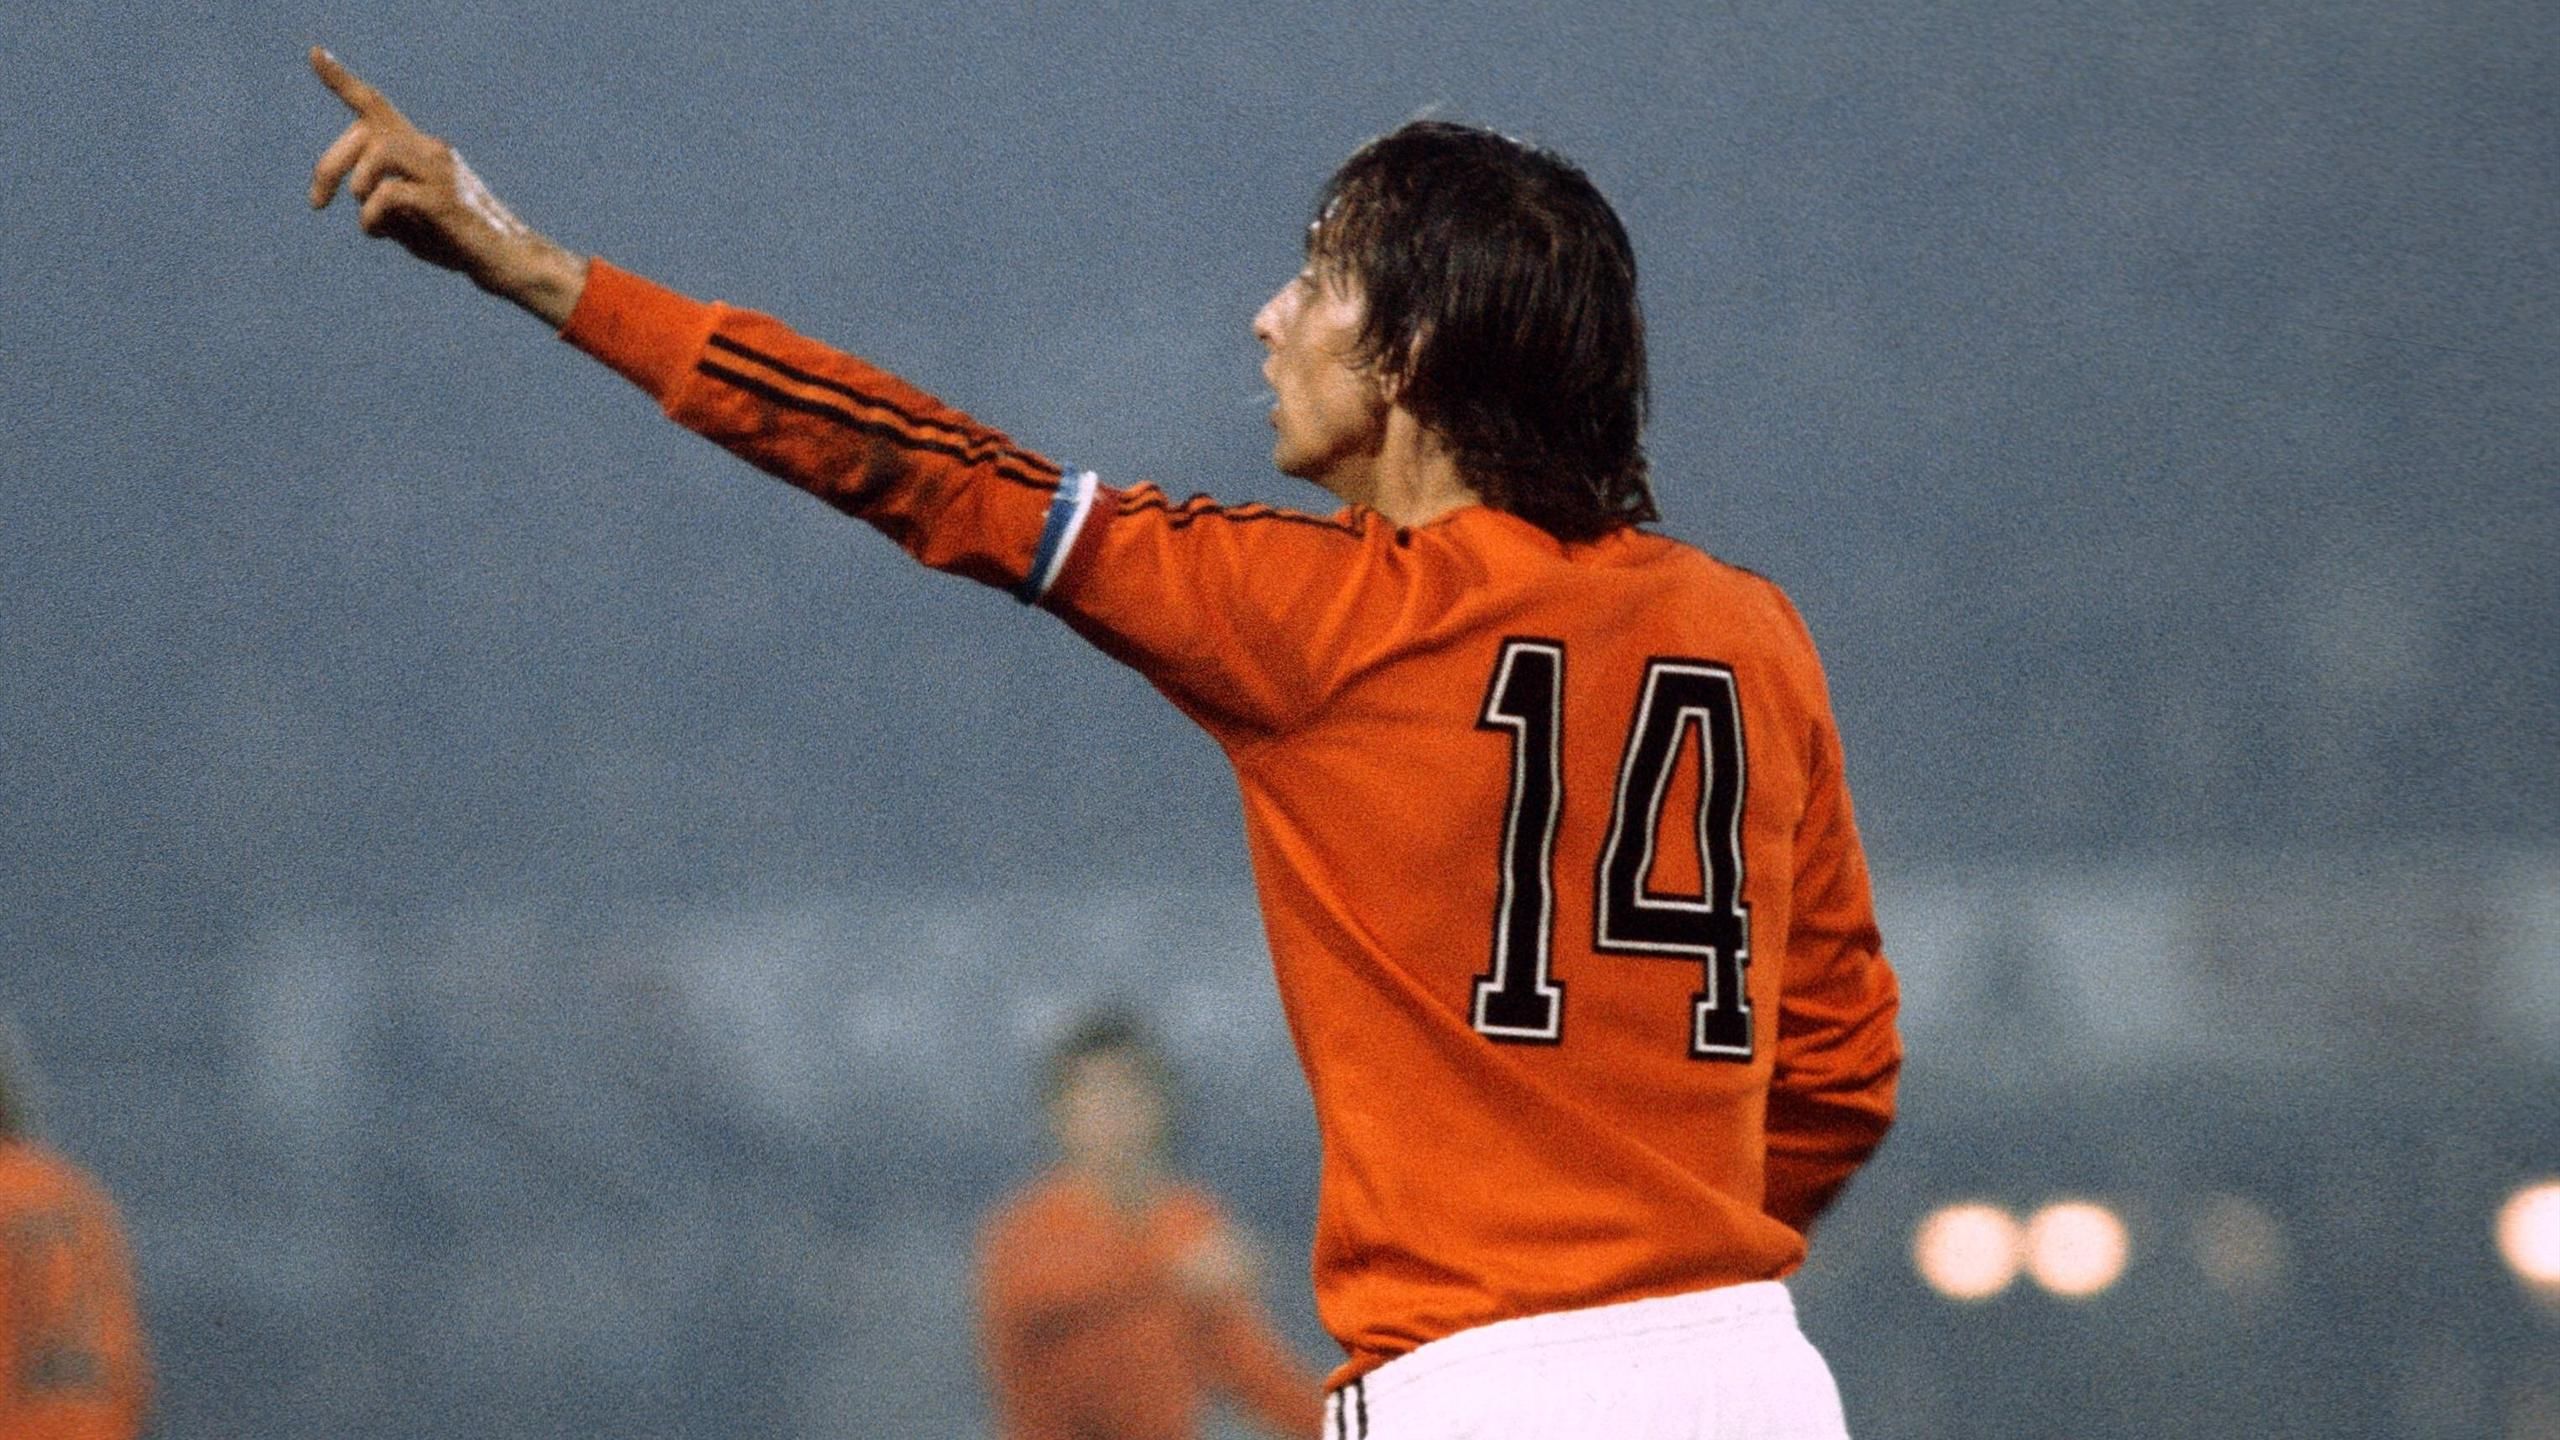 Johan Cruyff: Why the Dutch master wore the famous number 14 shirt